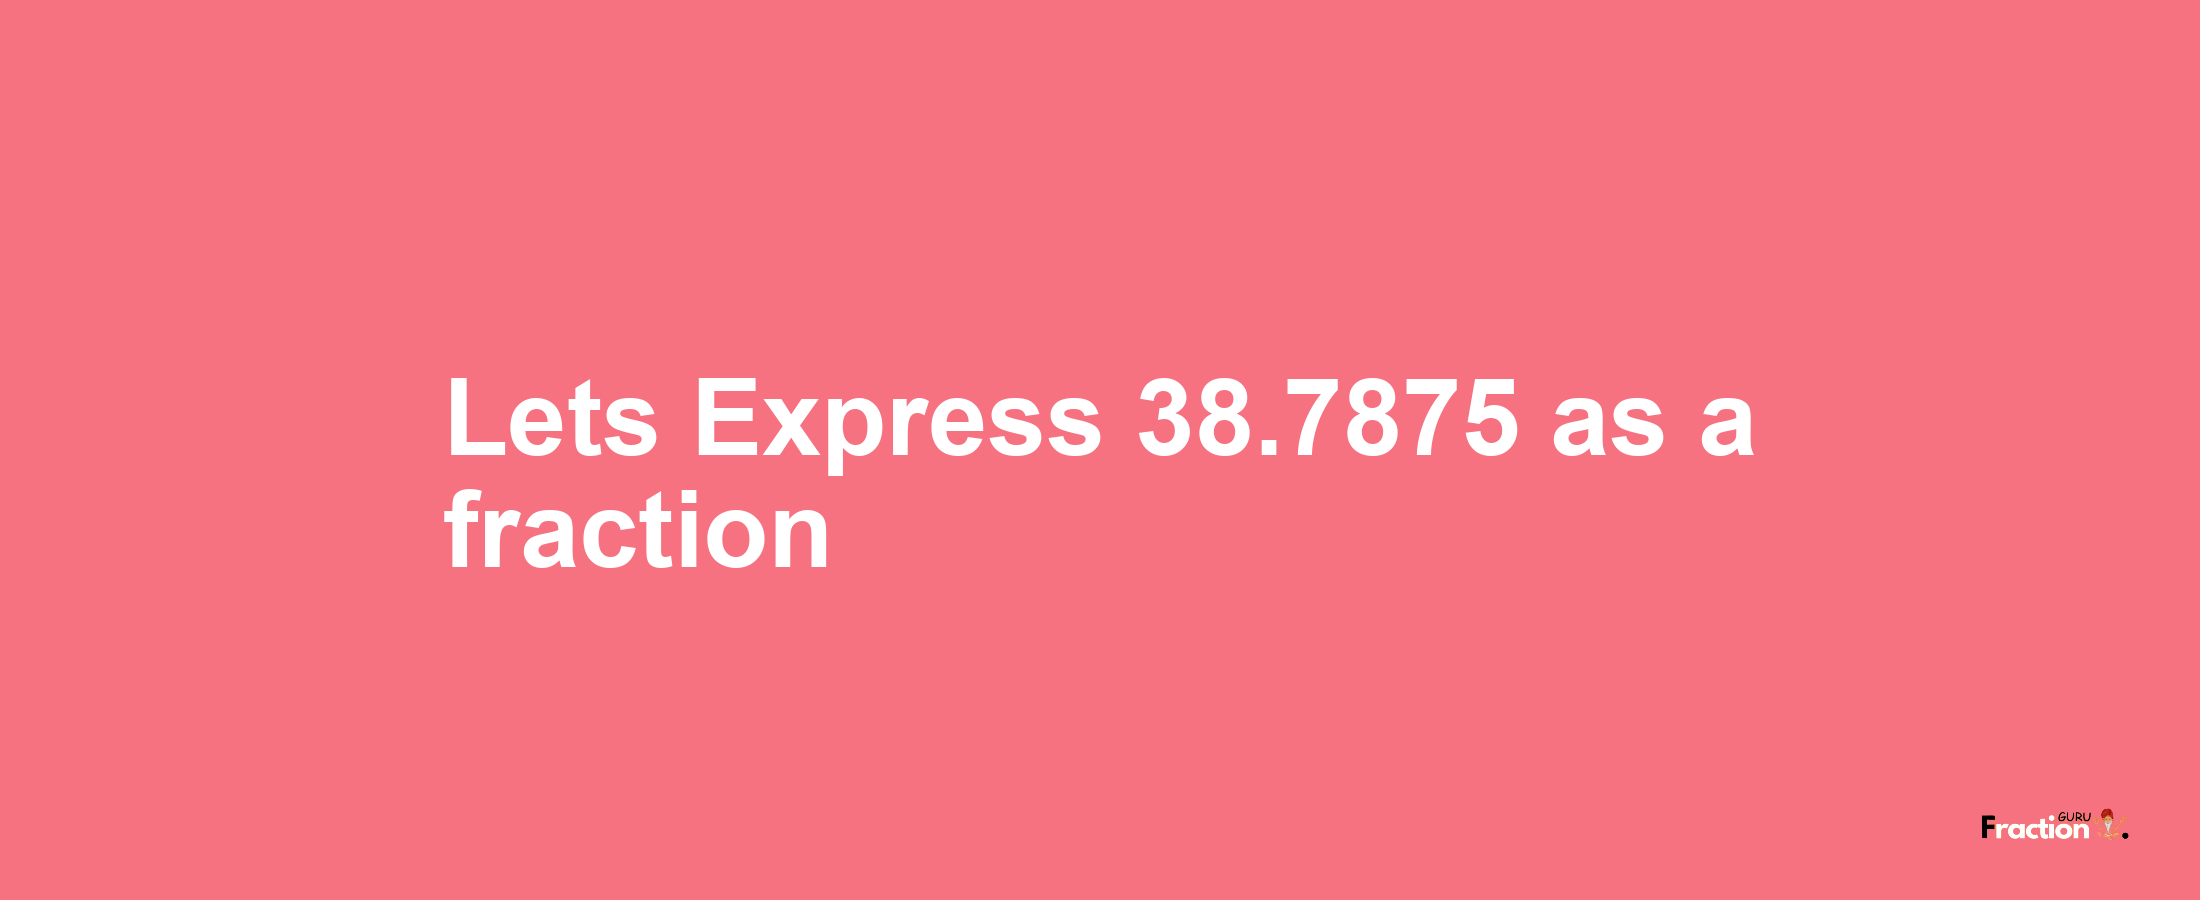 Lets Express 38.7875 as afraction